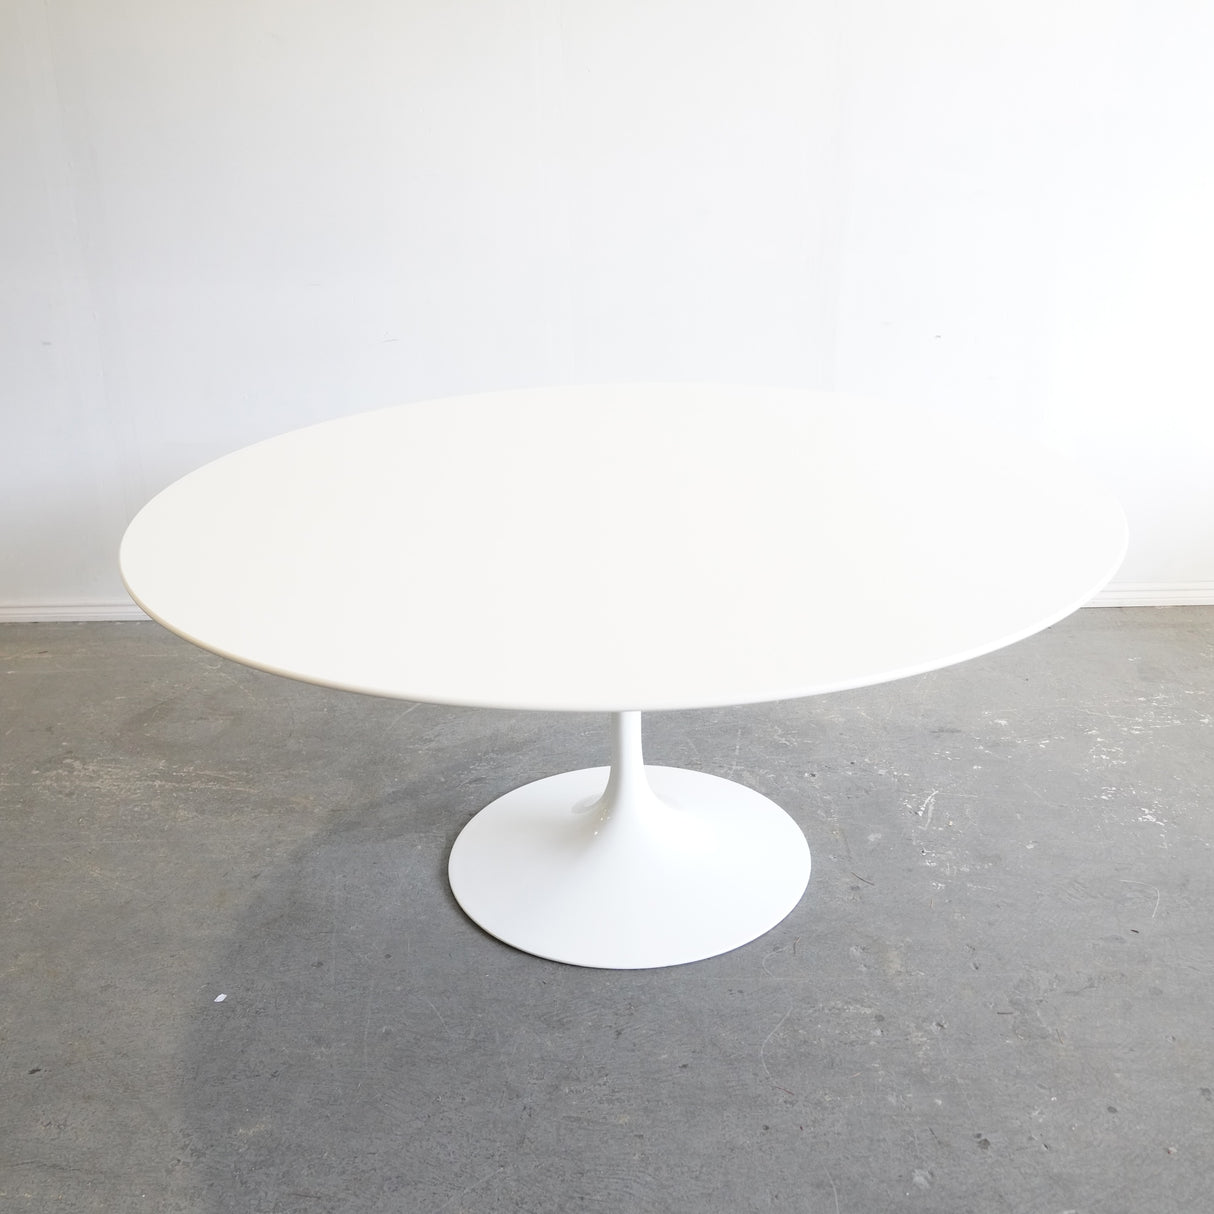 Authentic Knoll iconic Saarinen 60' Round Dining Table